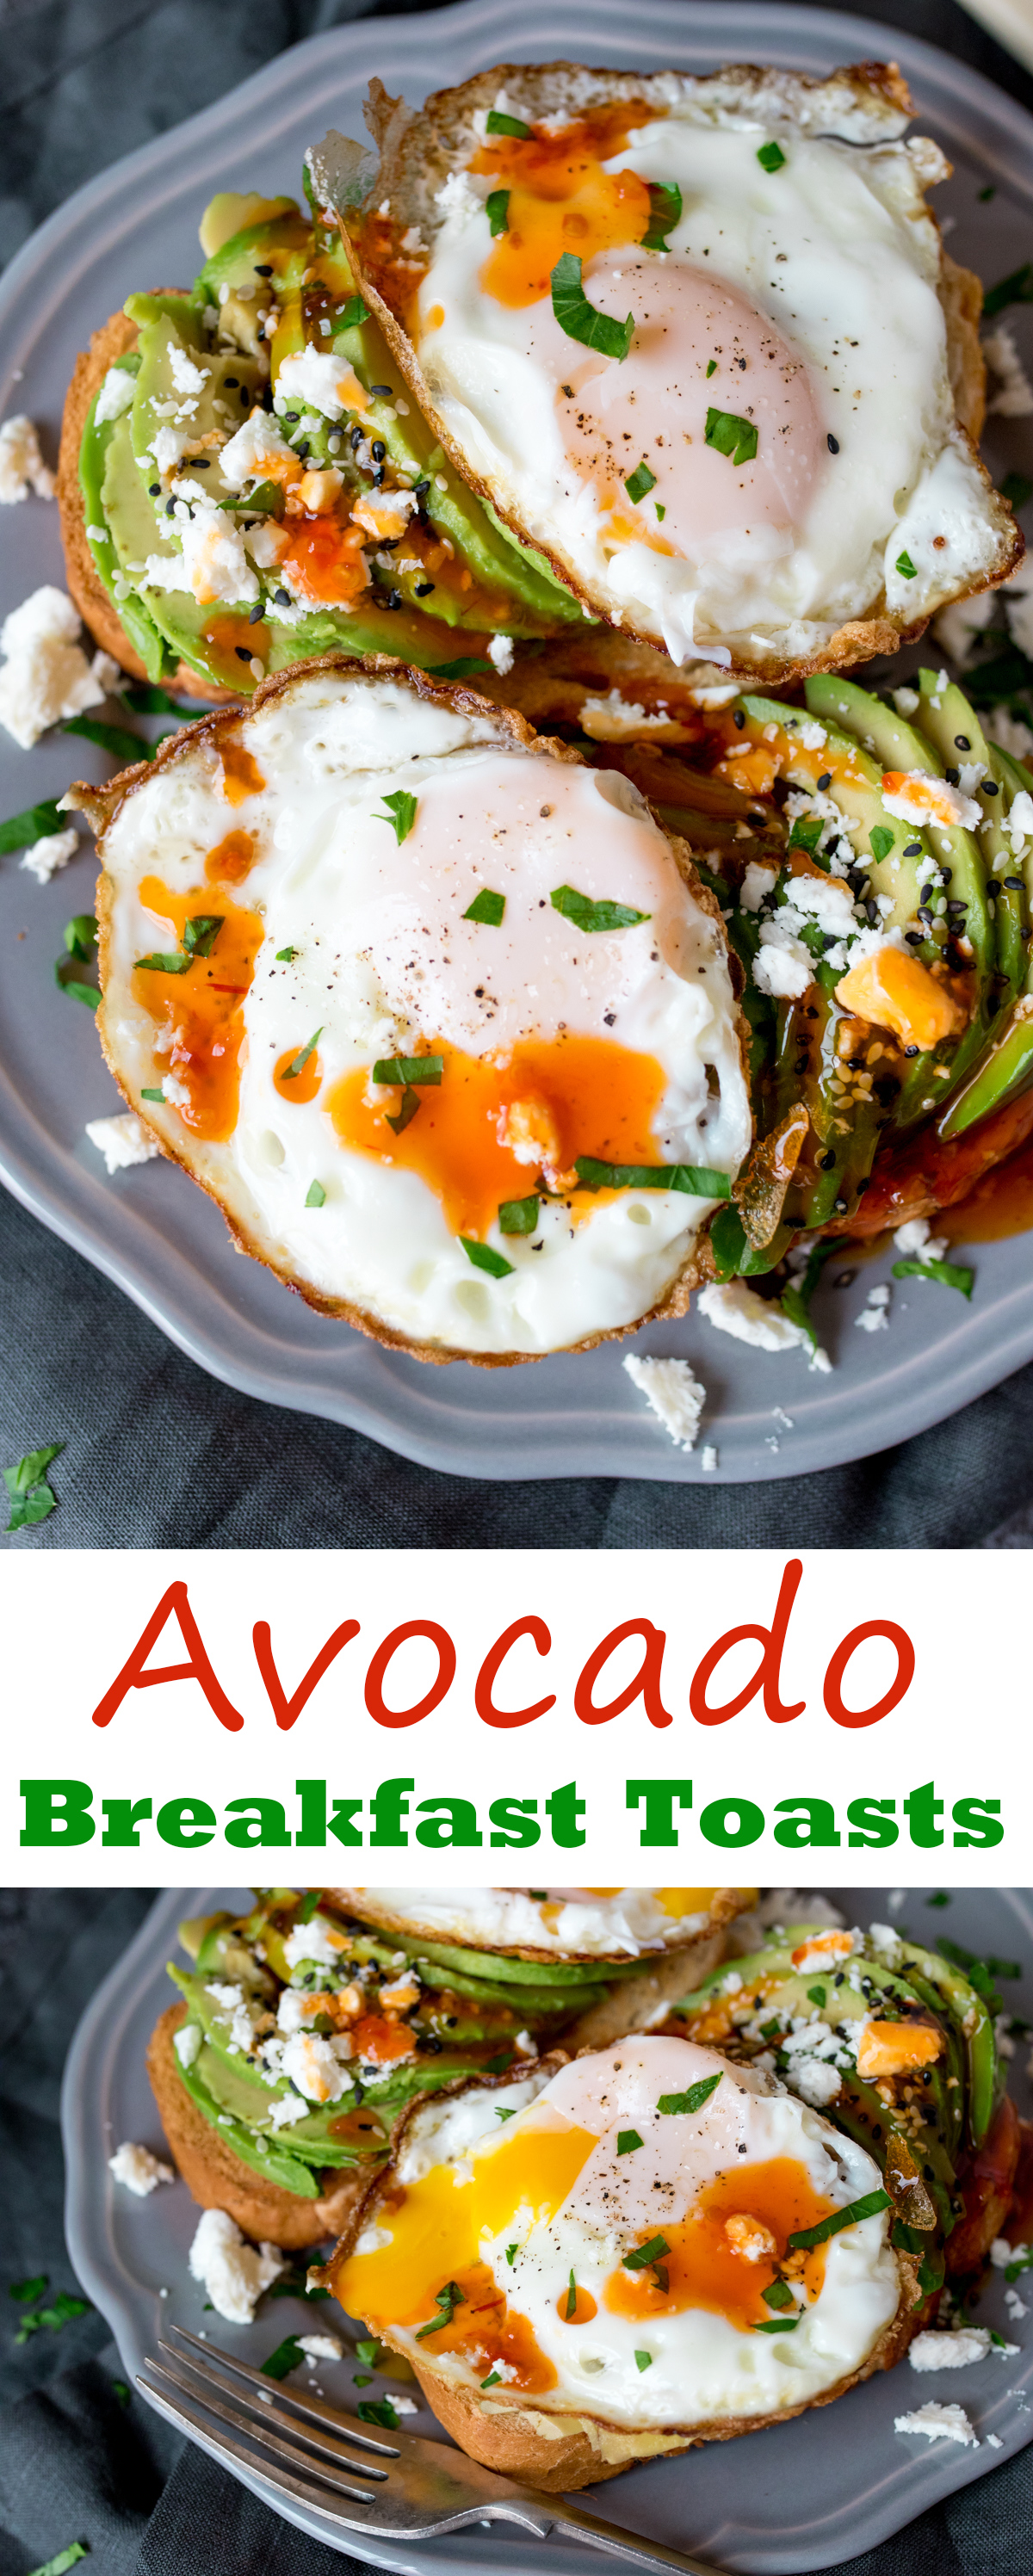 So full of goodness, these avocado breakfast toasts will give you lots of energy for the day!